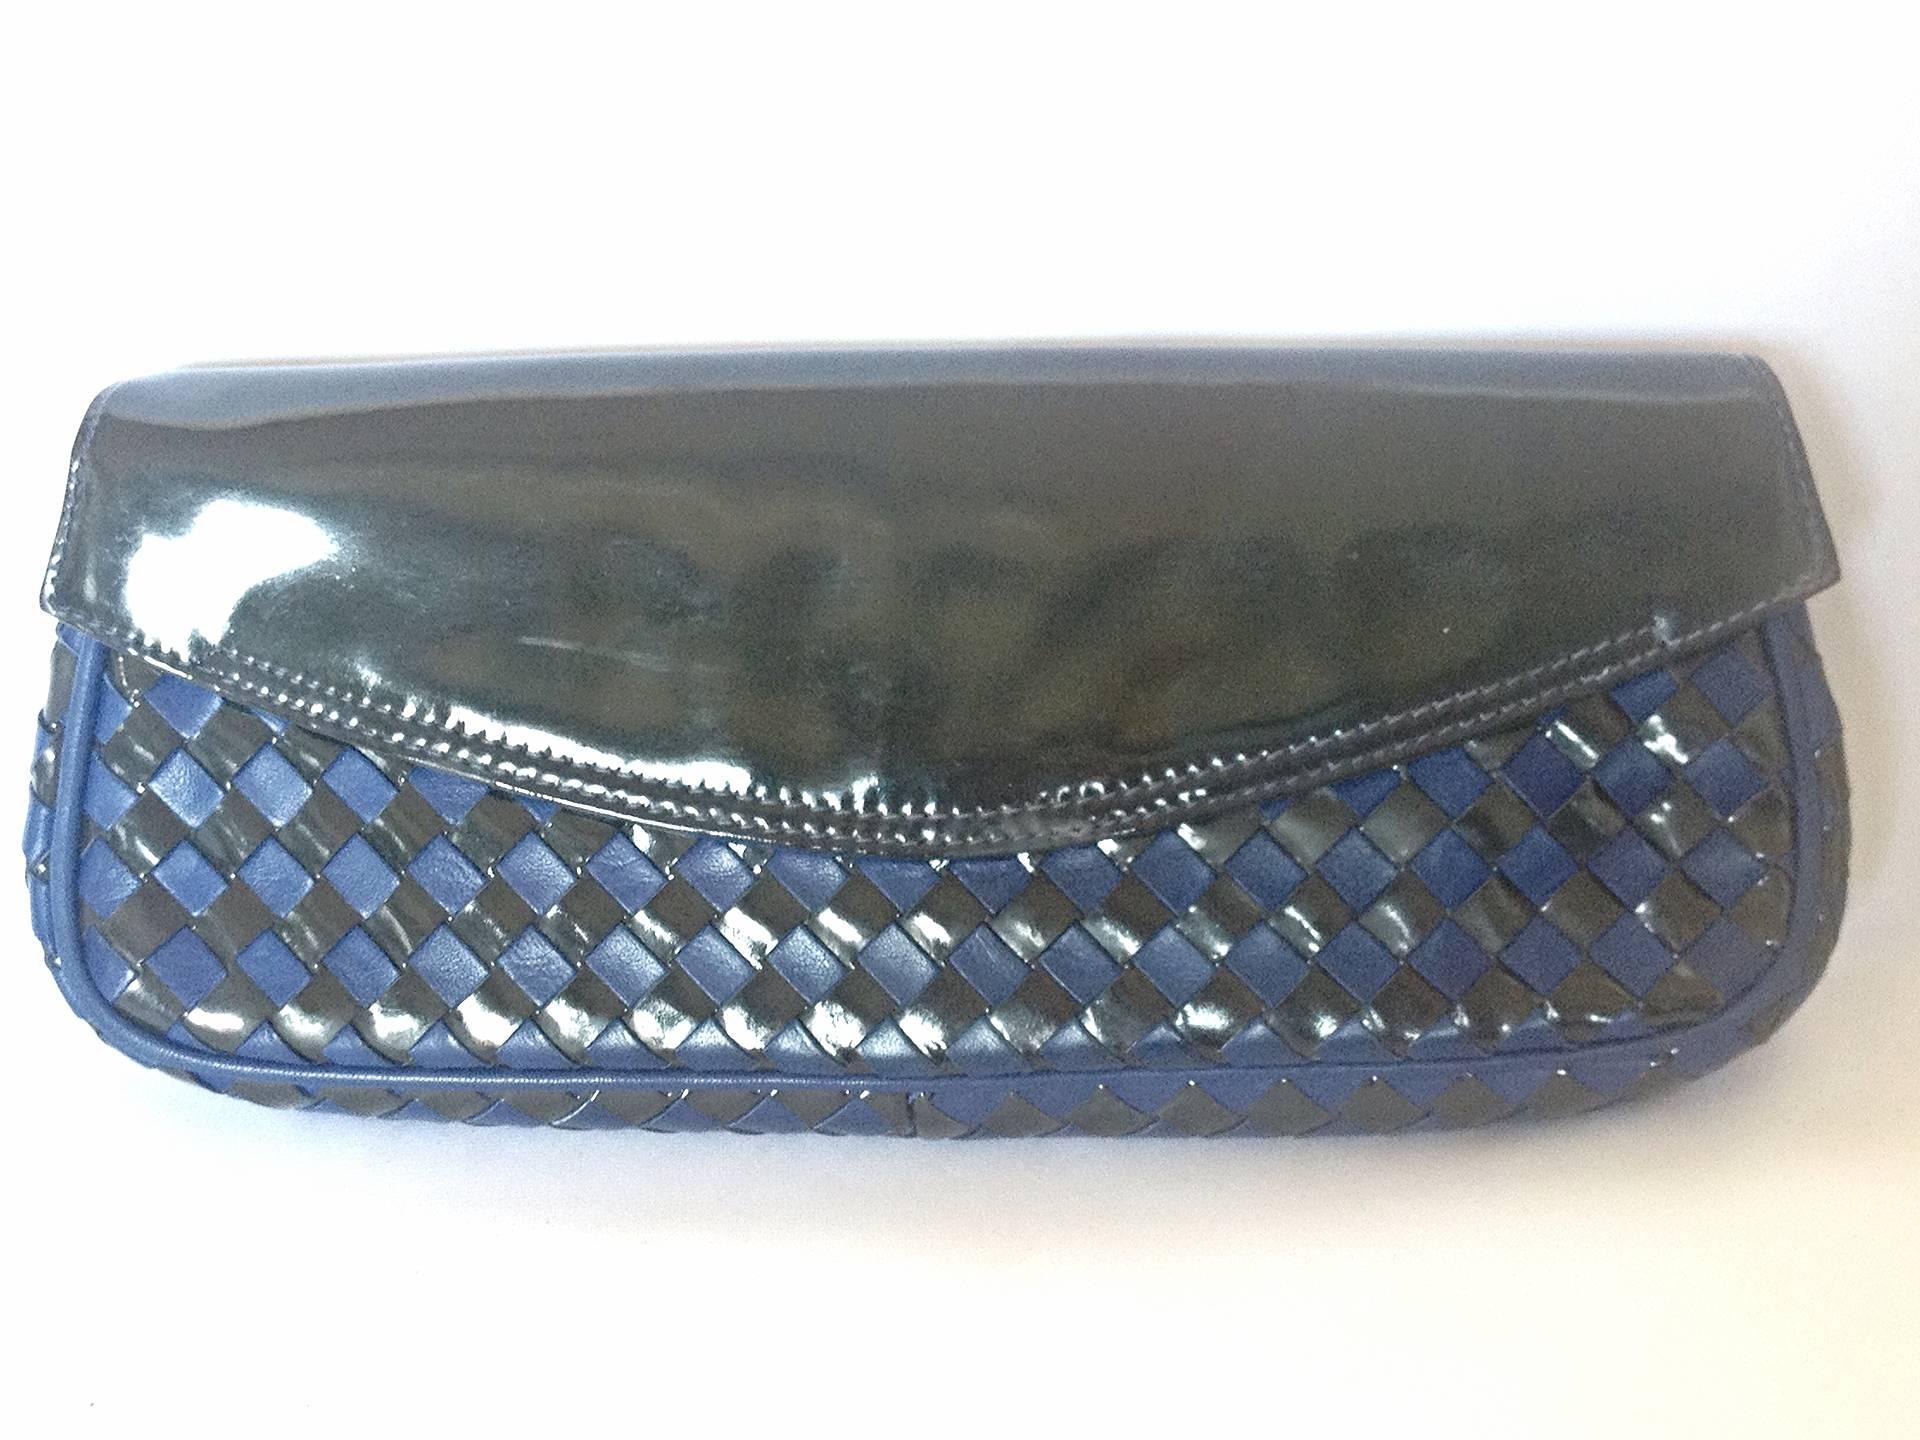 Vintage Bally black and blue enamel intrecciato design leather clutch purse In Good Condition For Sale In Kashiwa, Chiba